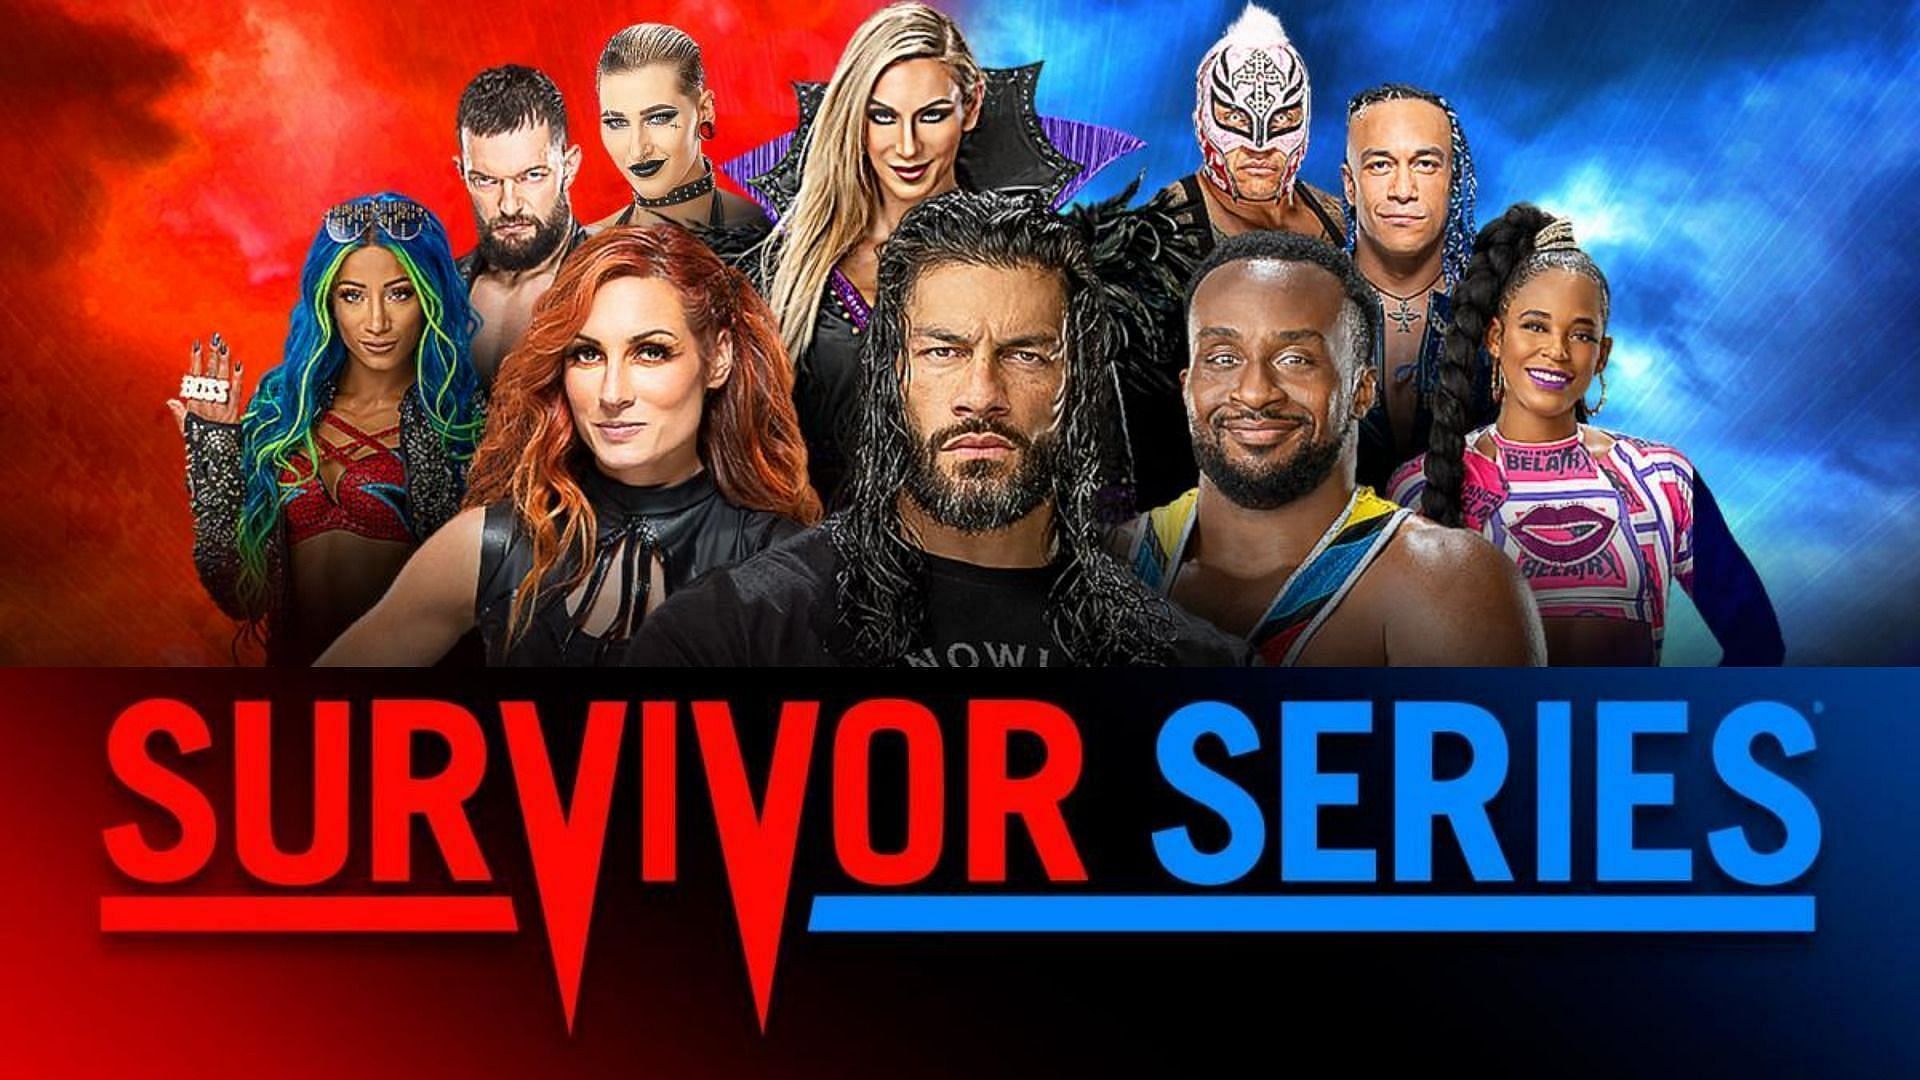 RAW vs. SmackDown once again happens at Survivor Series 2021